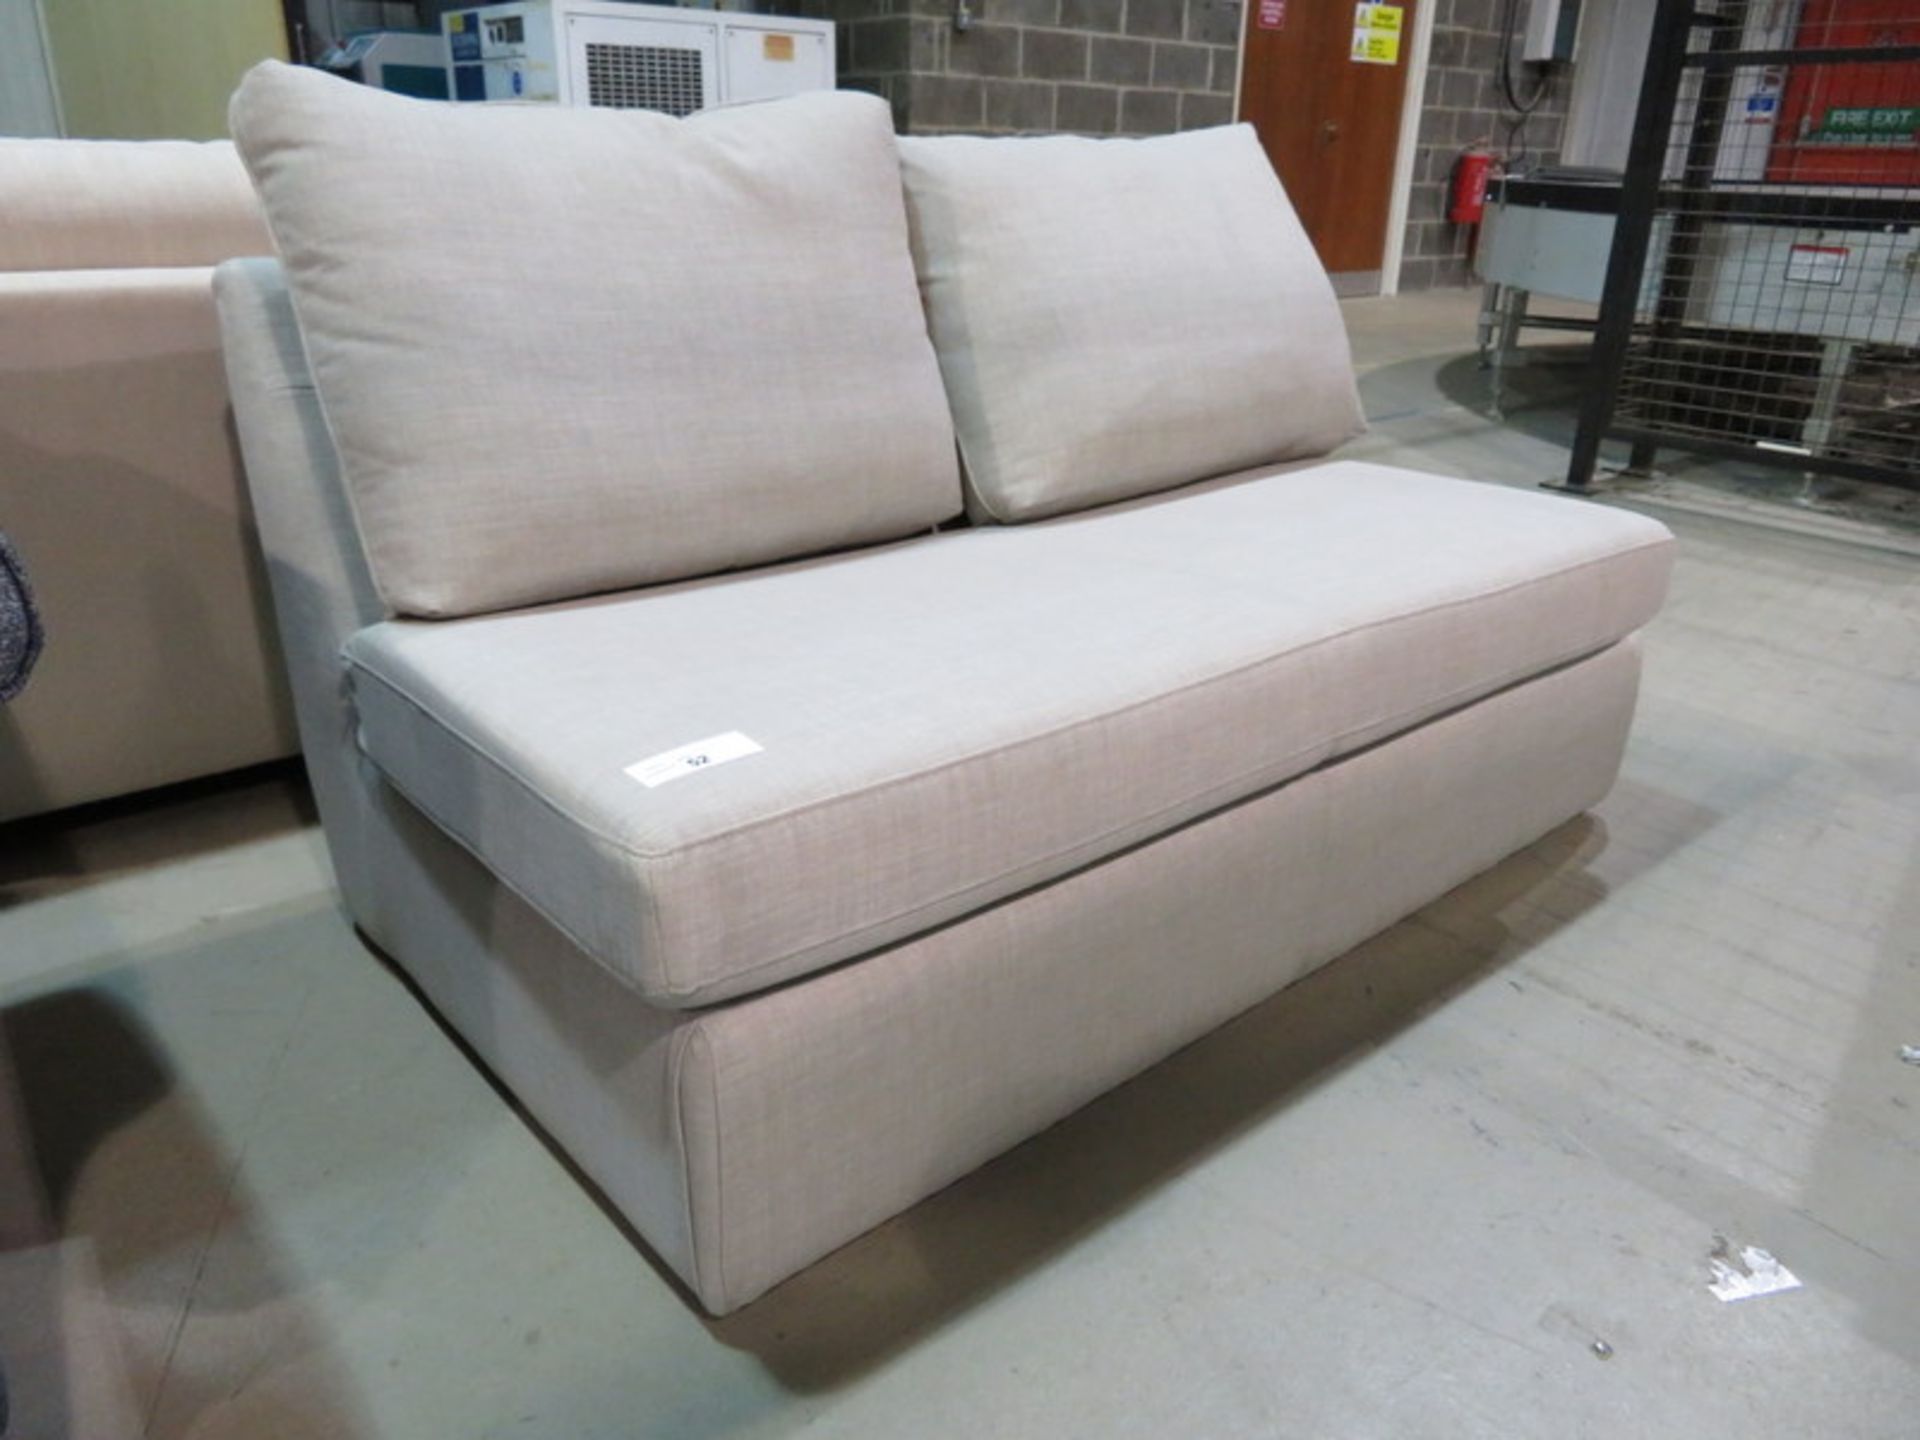 2 Seater beige sofa-bed. Ex Display - 1440 x 920mm (LxD) - Image 2 of 5